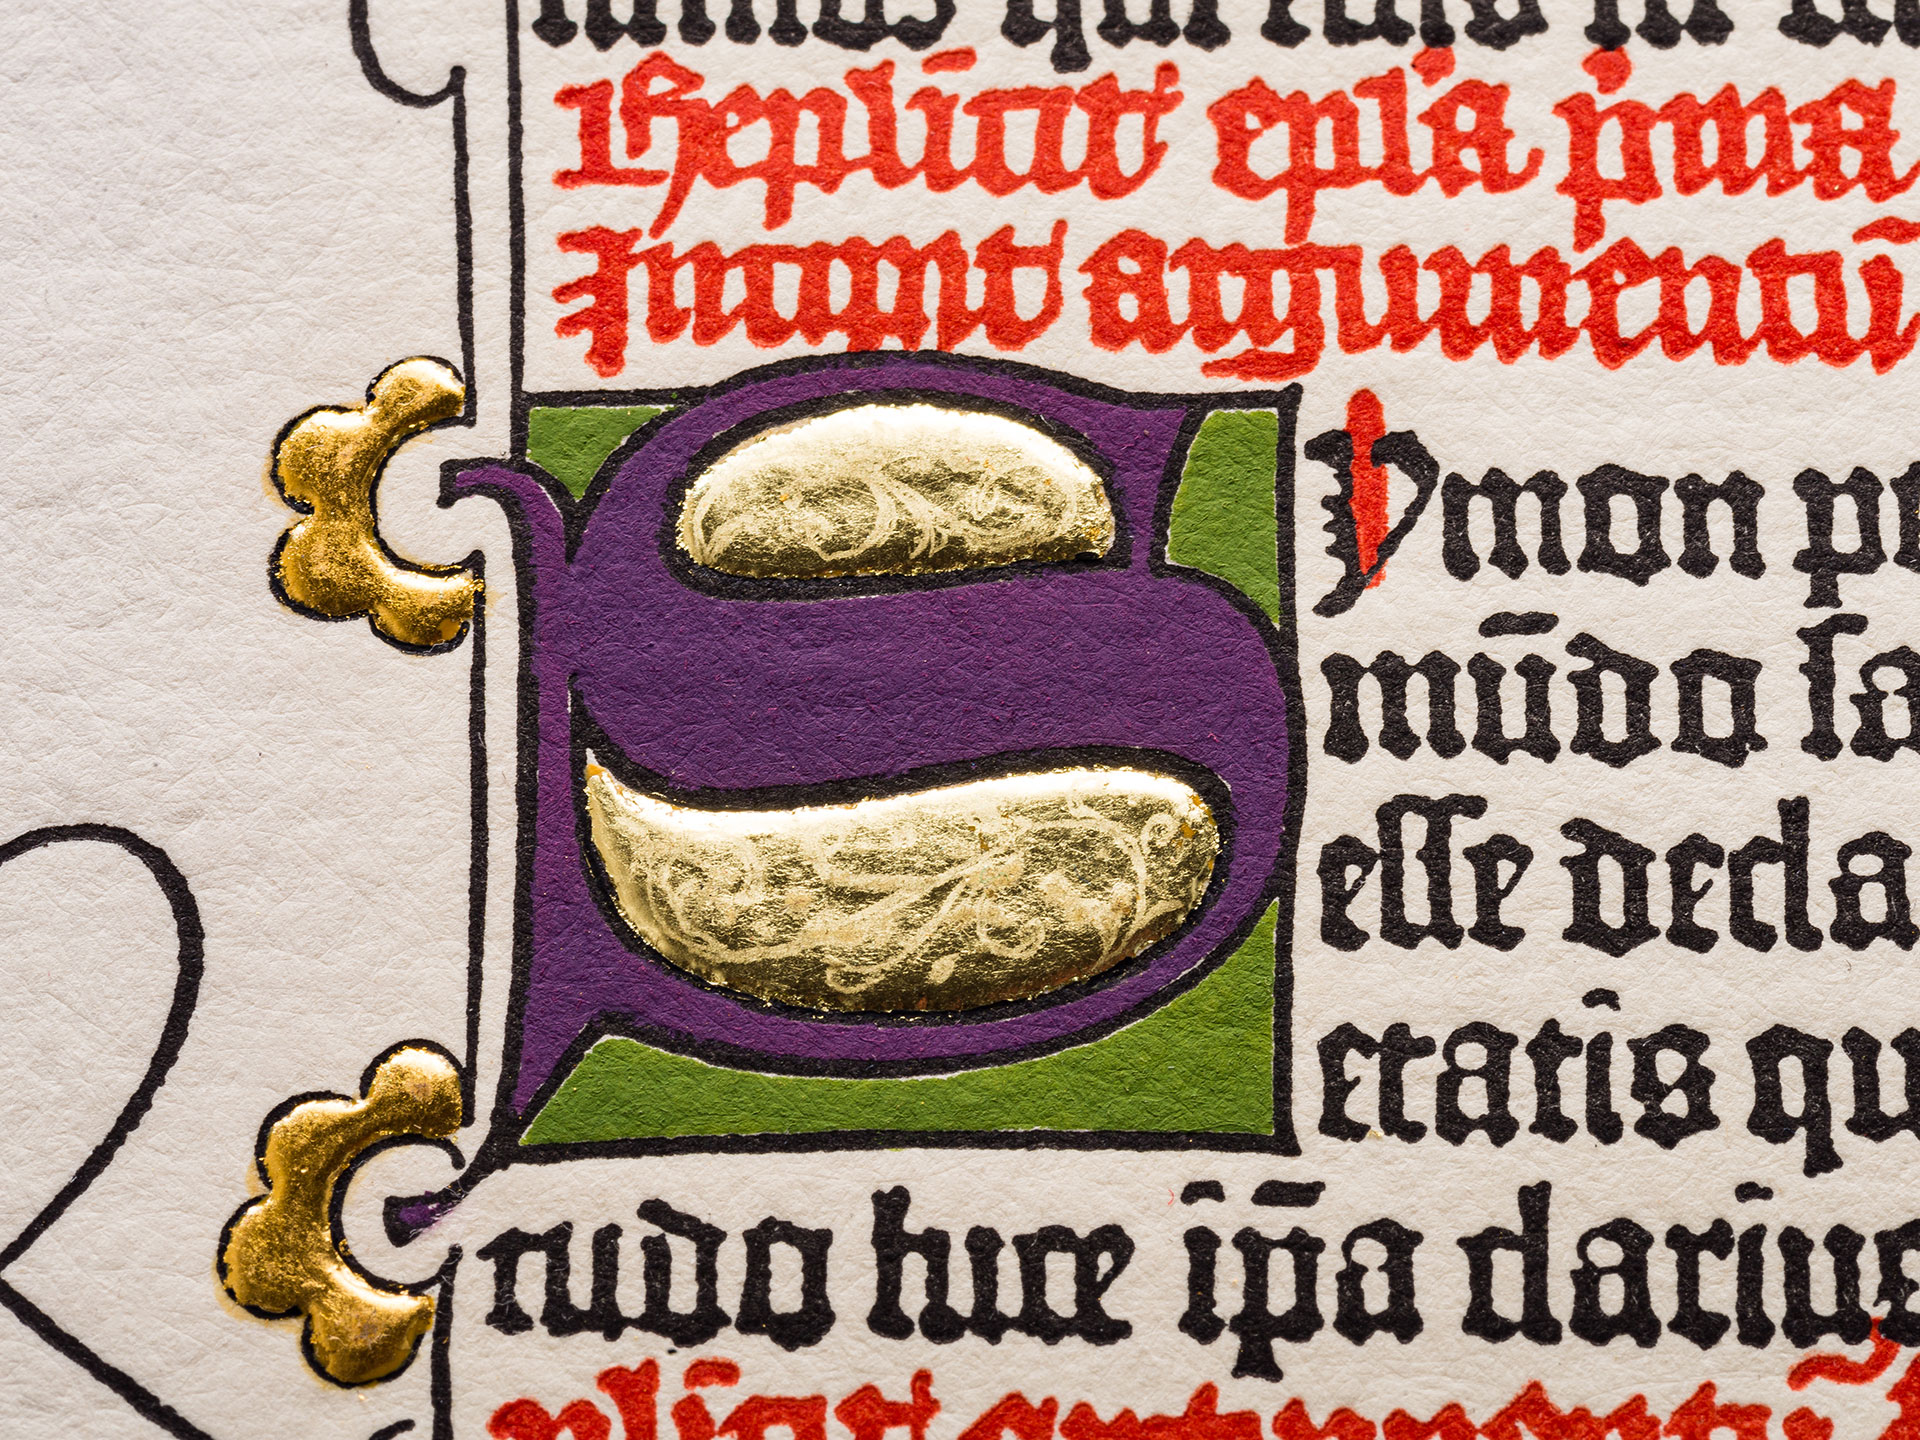 The Second Epistle of Peter. Press print from the Gutenberg Bible